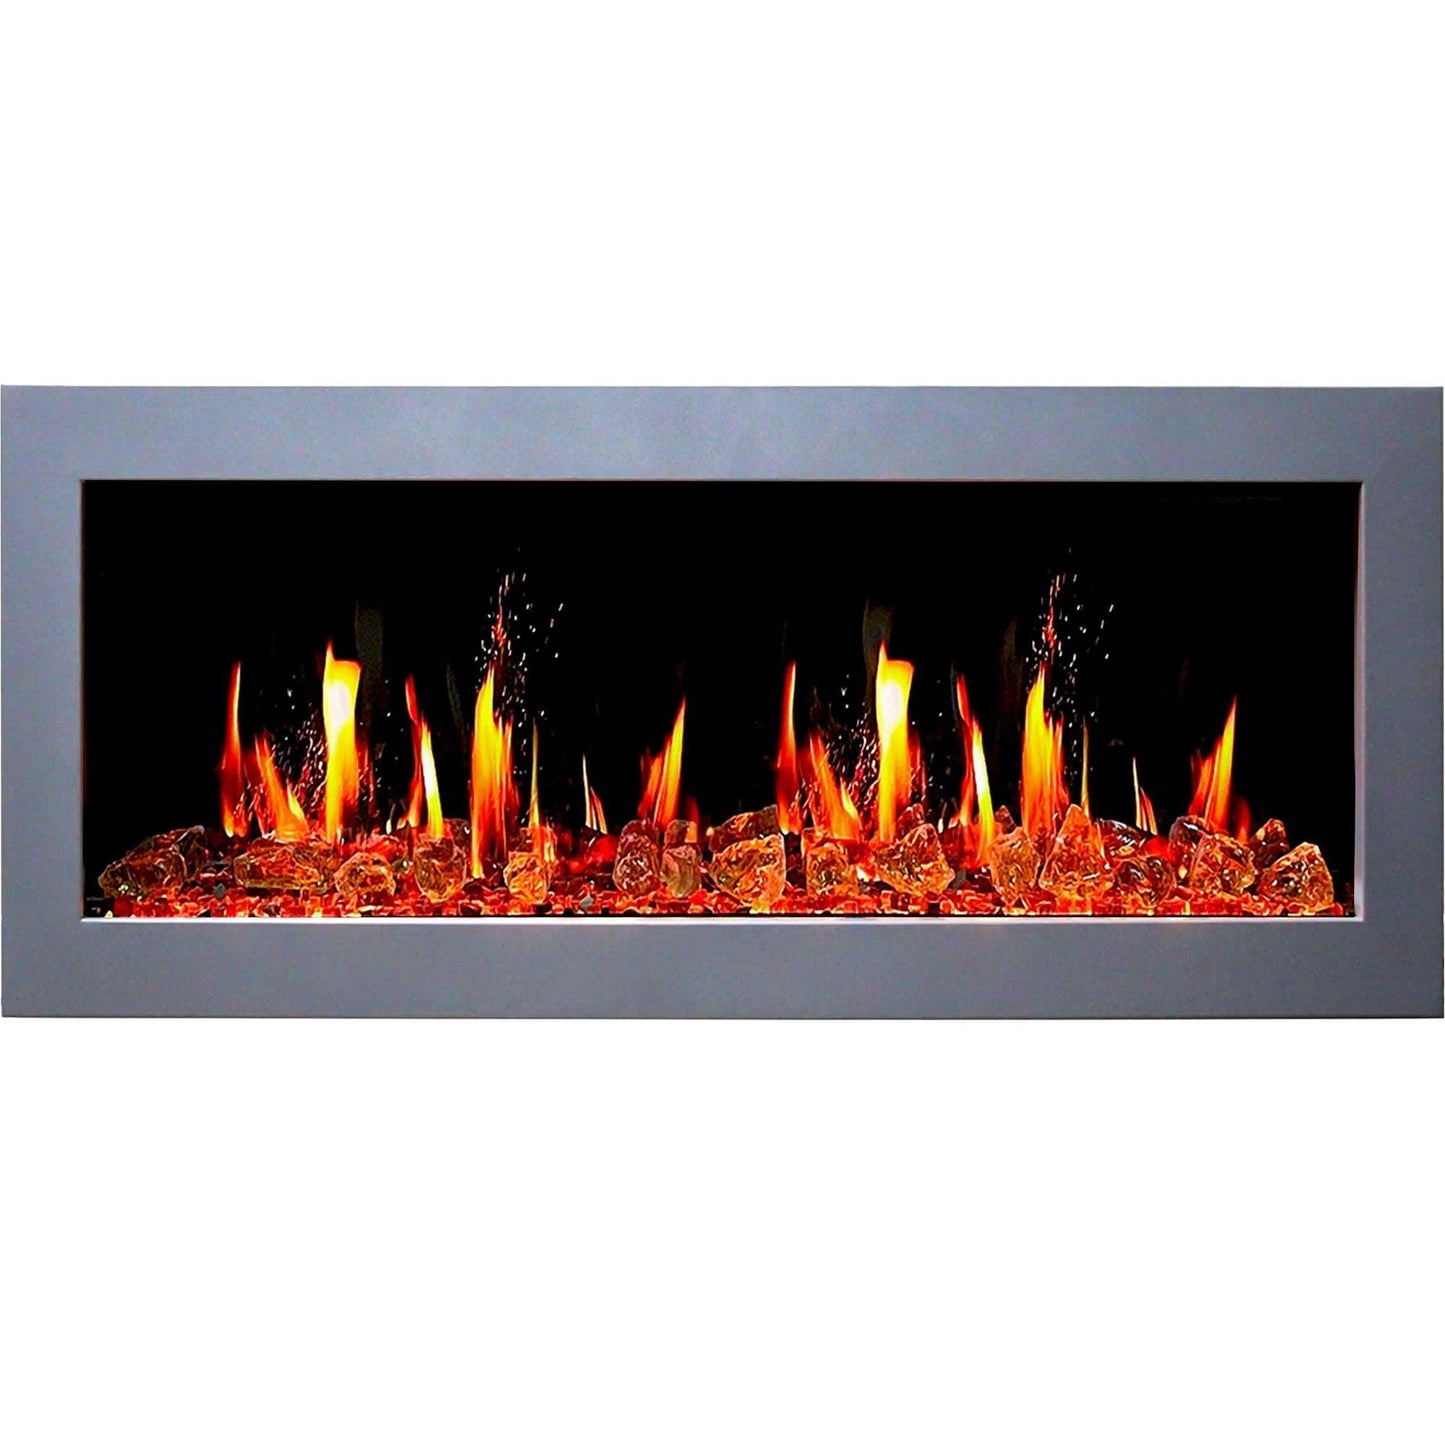 ZopaFlame™ 47" Linear Wall-mount Electric Fireplace - SG17488X - ZopaFlame Fireplaces